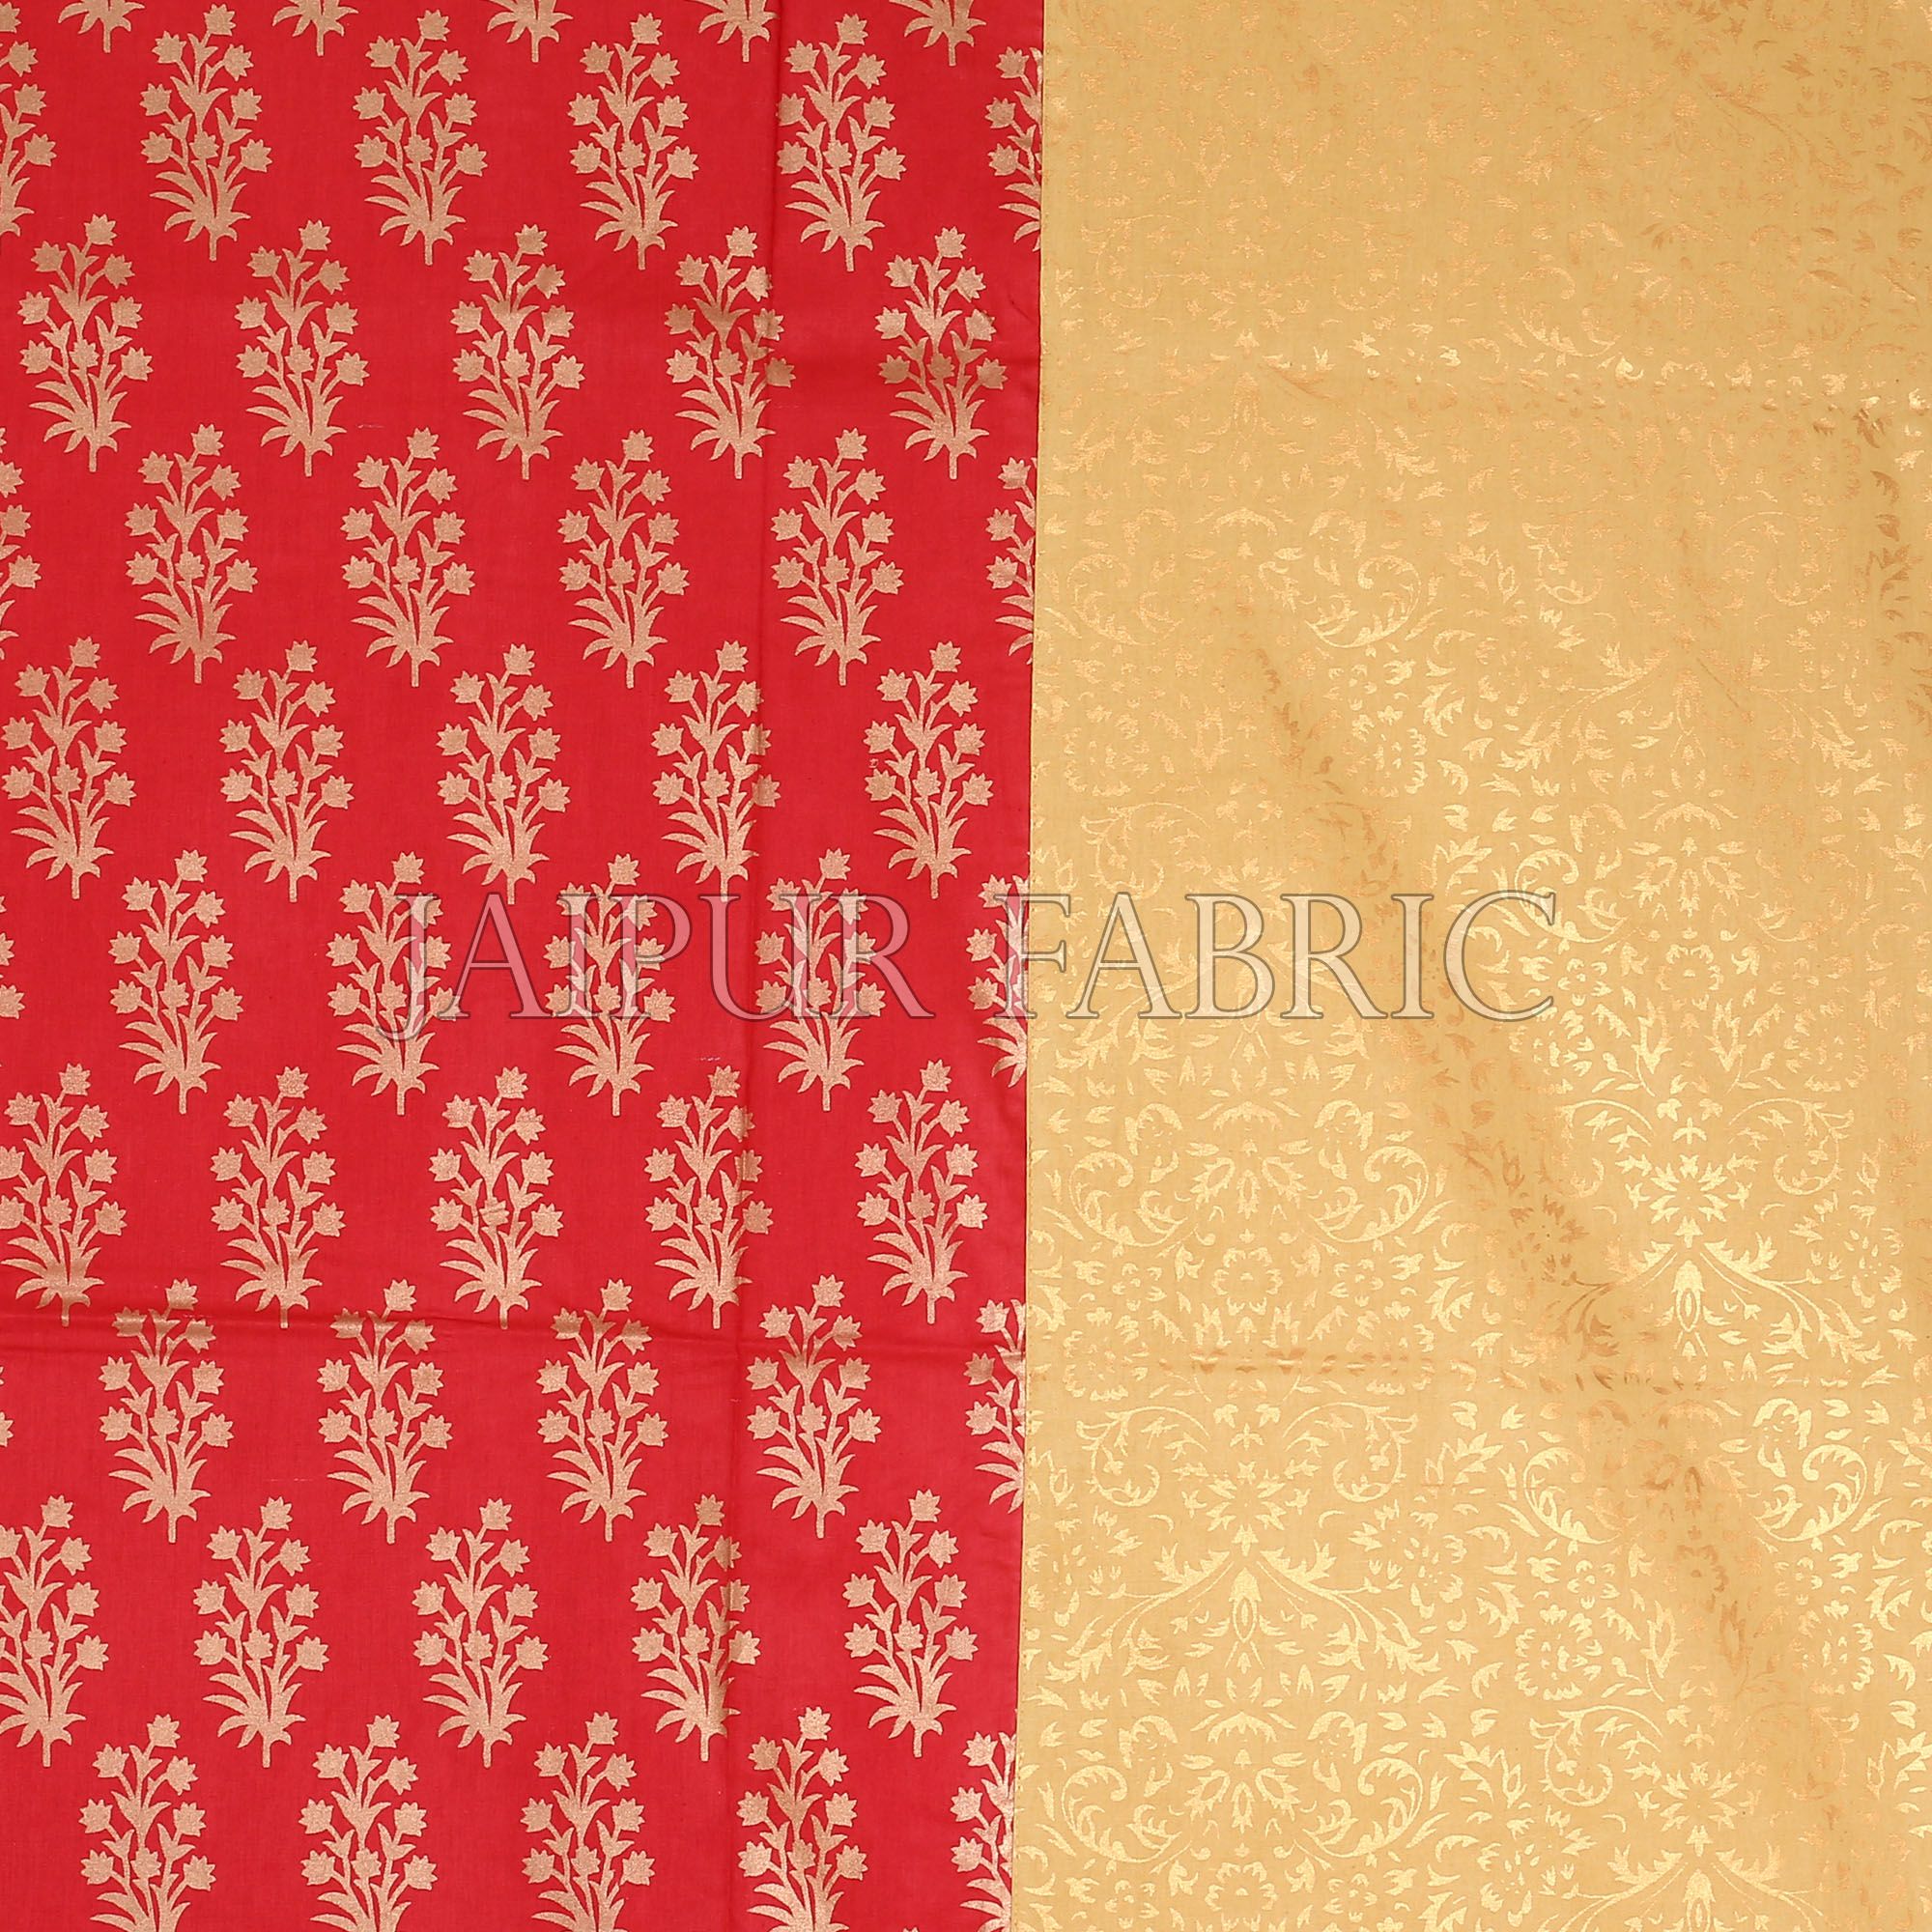 Cream Broad Border With Shining Gold Print Orange Base Gold Flower Bunch Pattern Super Fine Cotton  Double Bed Sheet